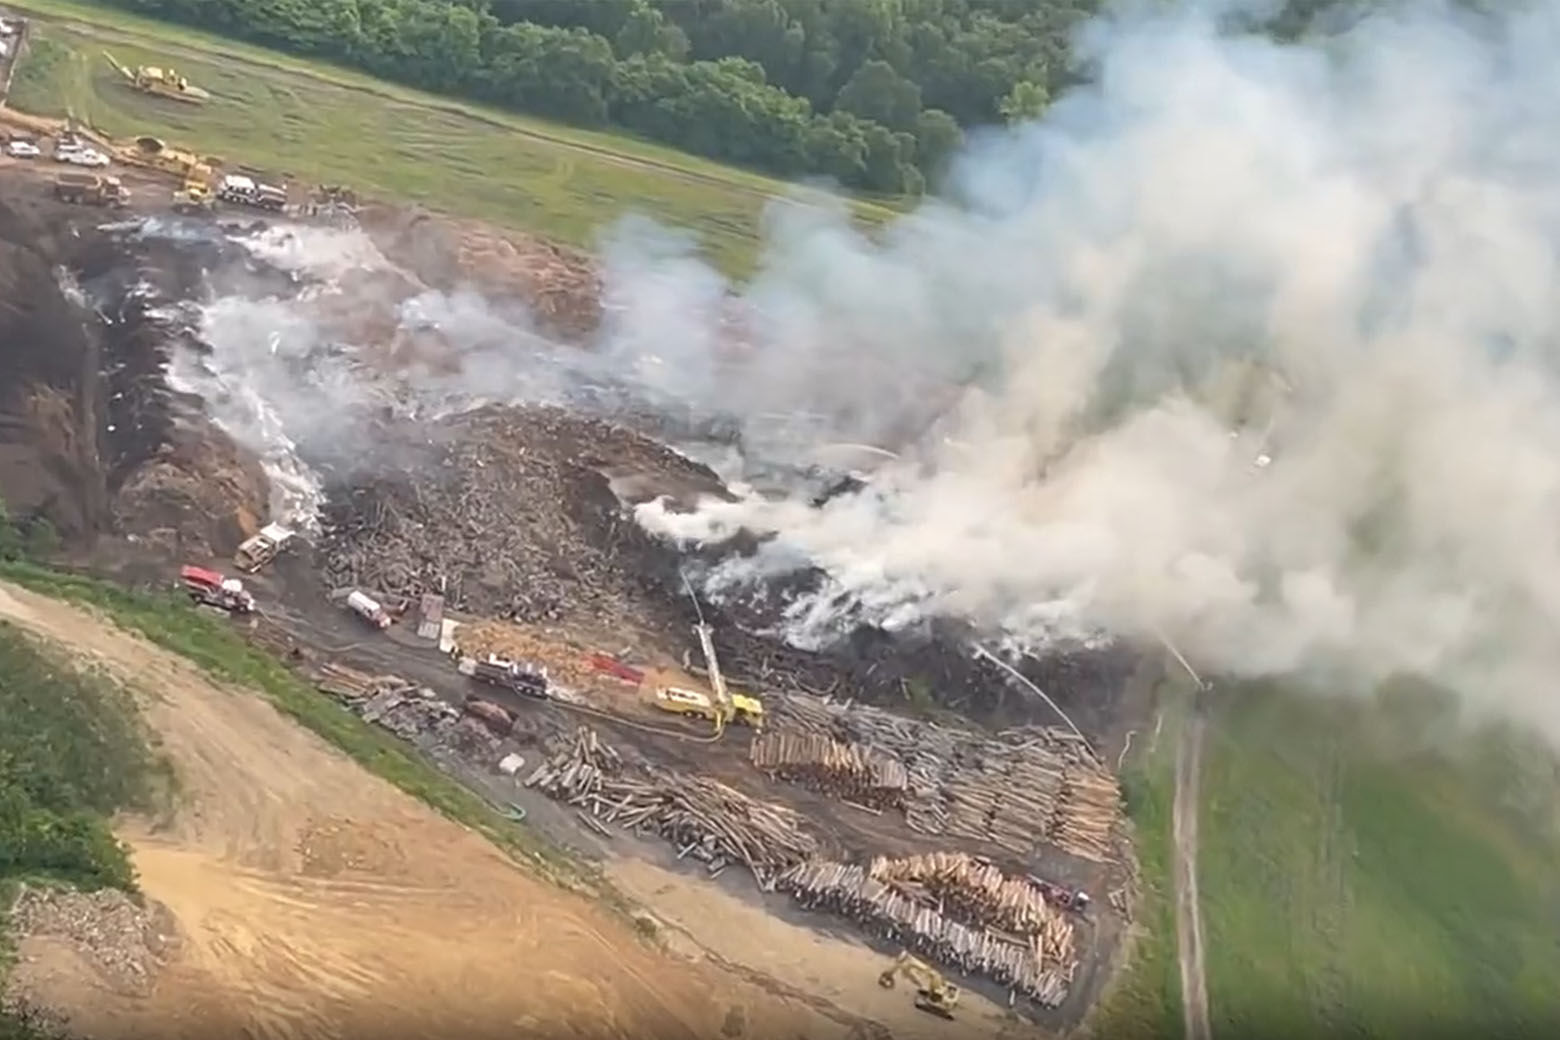 According to the Fairfax County Fire and Rescue Department, the fire broke out in the landfill around 11 p.m. on June 5. (Courtesy Fairfax County Fire and Rescue)